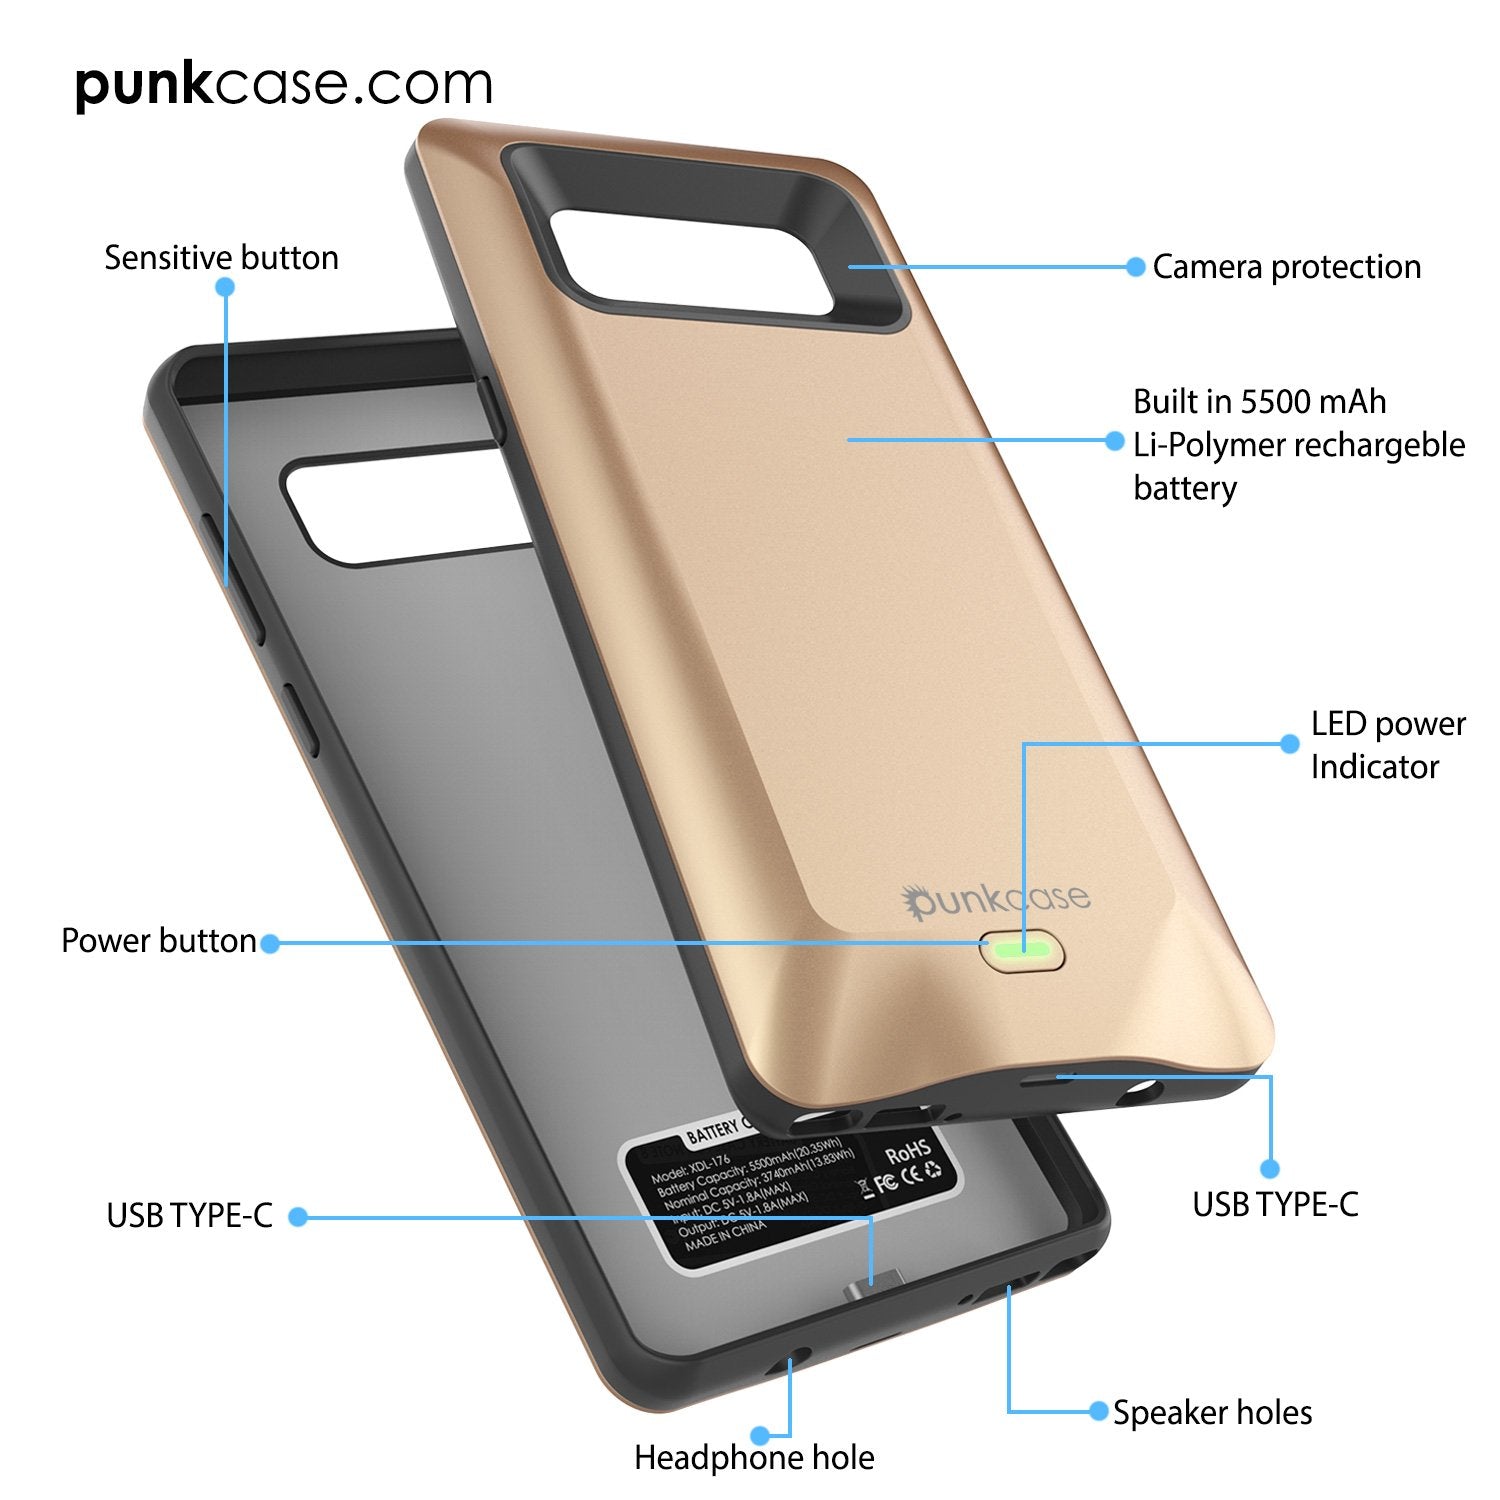 Galaxy Note 8 Battery Case, Punkcase 5000mAH Charger Case W/ Screen Protector | Integrated USB Port | IntelSwitch [Blue] - PunkCase NZ